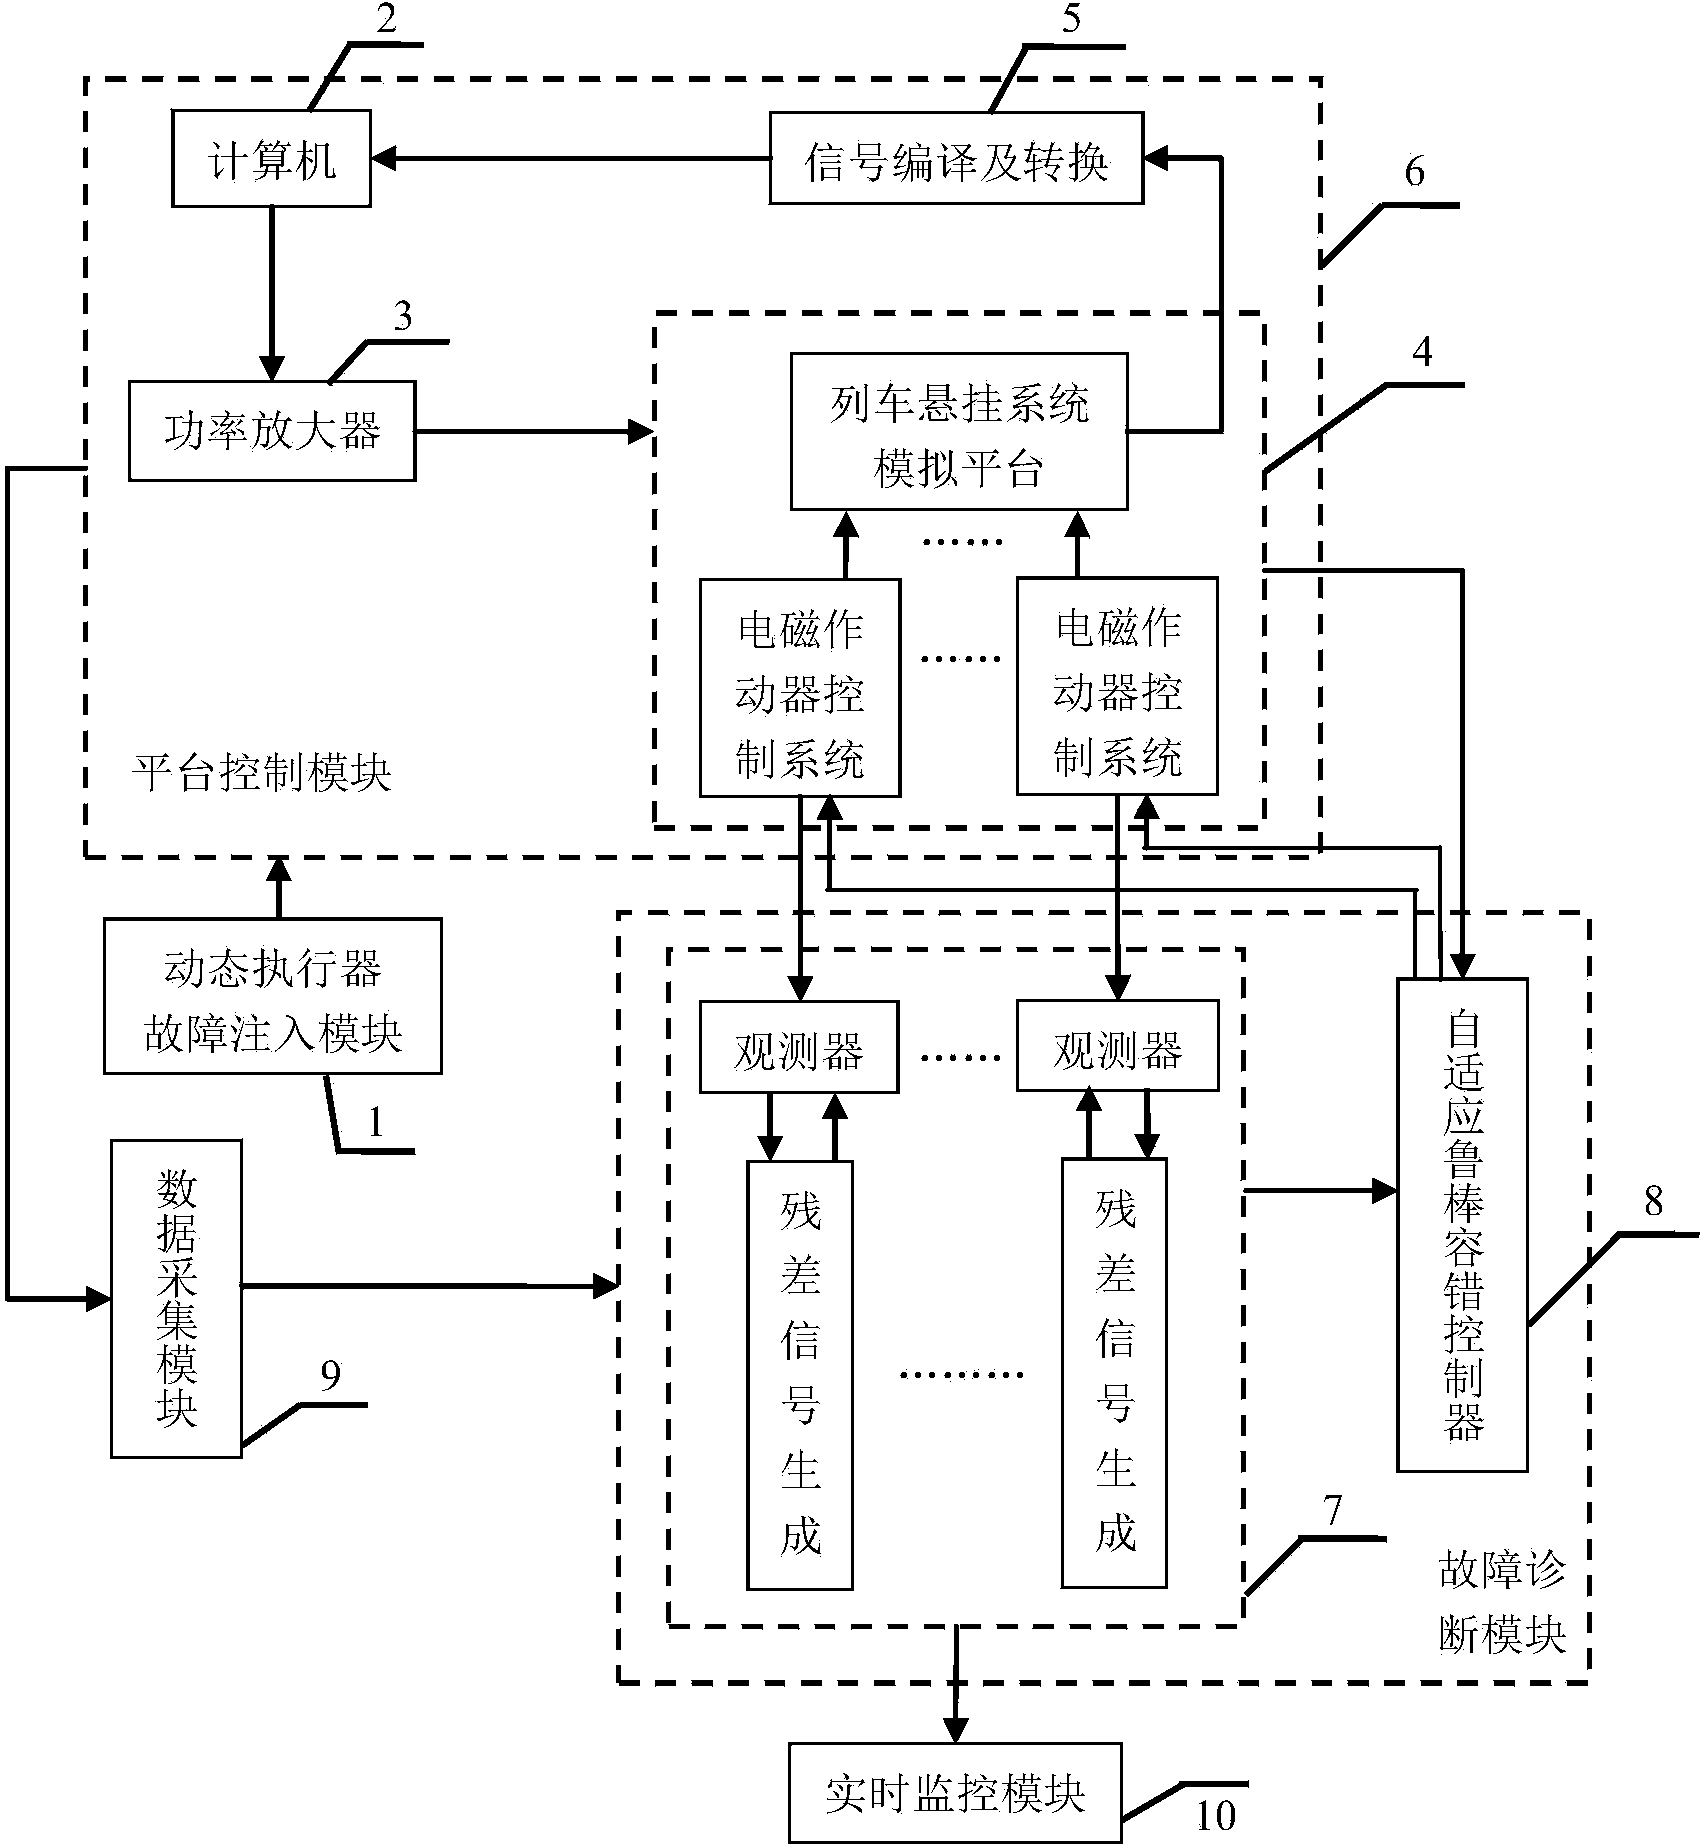 Train suspension system fault diagnosis and fault-tolerant control method based on dynamic actuator